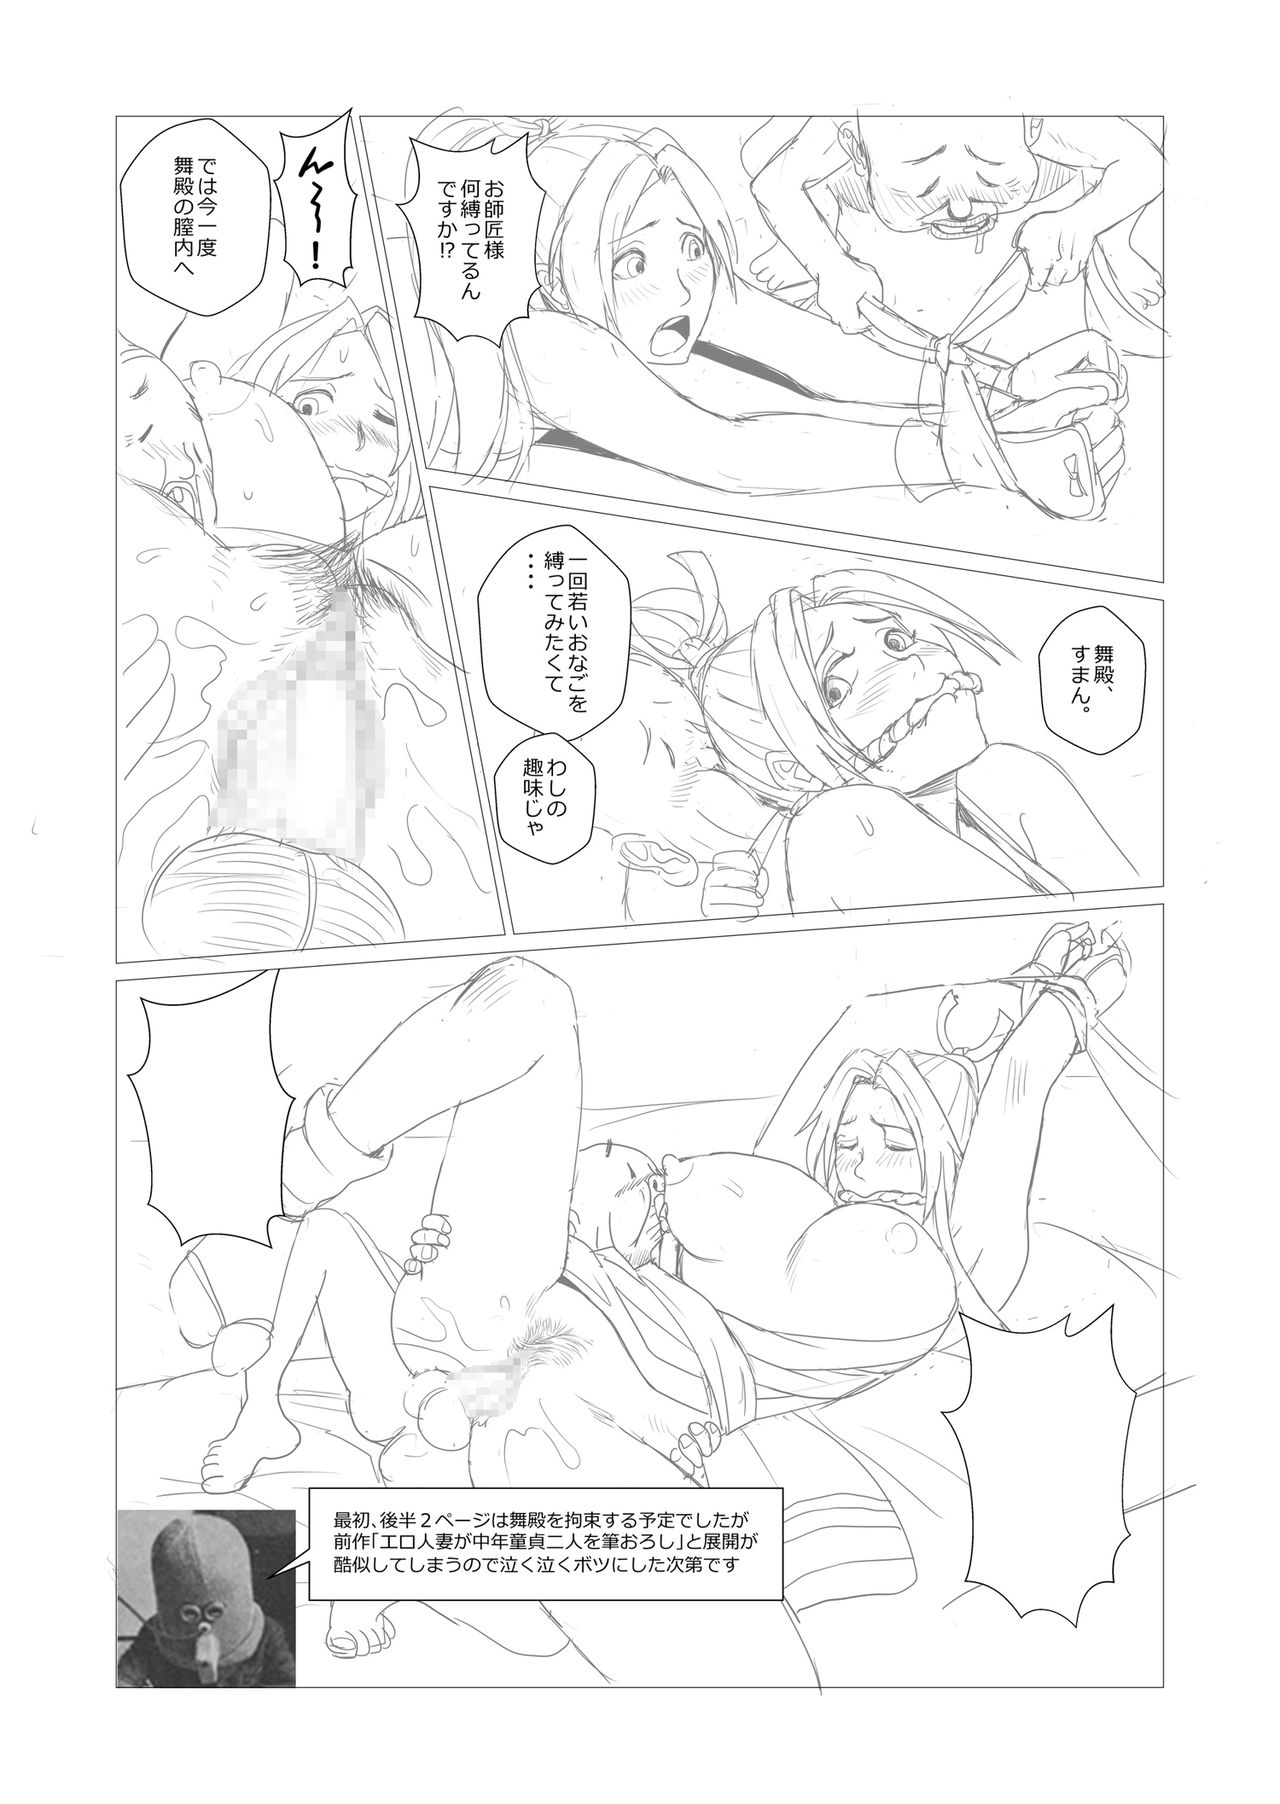 [Falcon115 (Forester)] Maidono (The King of Fighters) [Digital] page 15 full